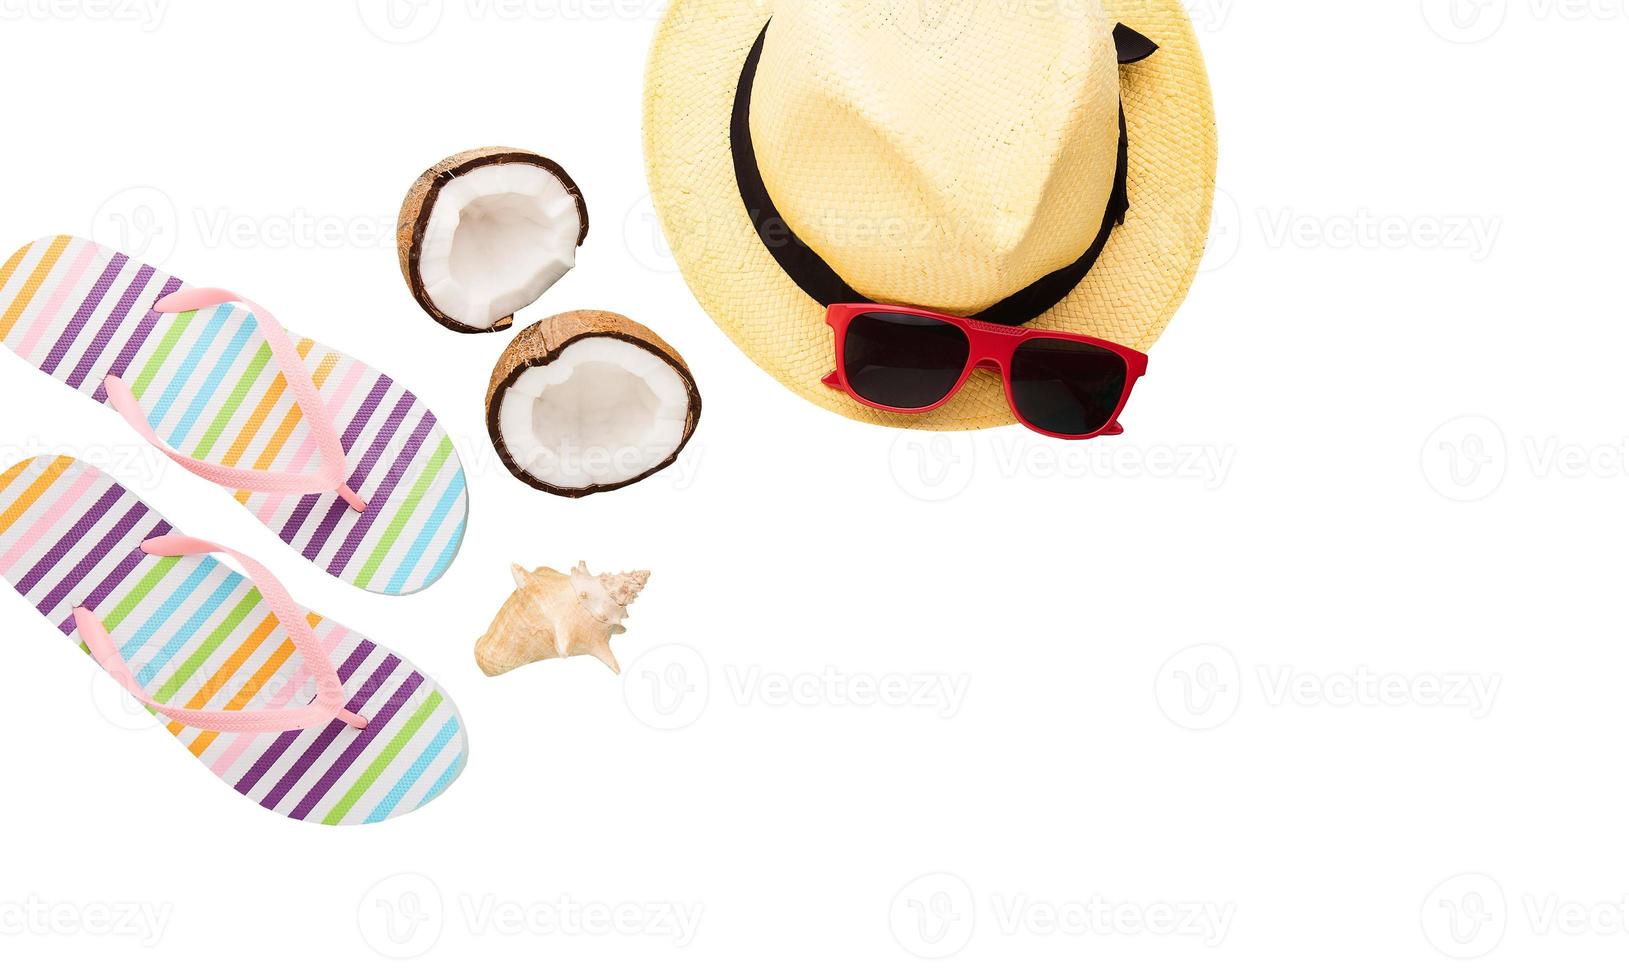 Summer accessories. Shoes, shell, hat, coconut, sunglasses. Summertime background isolated on white. Flip flops and food top view. Striped slippers photo